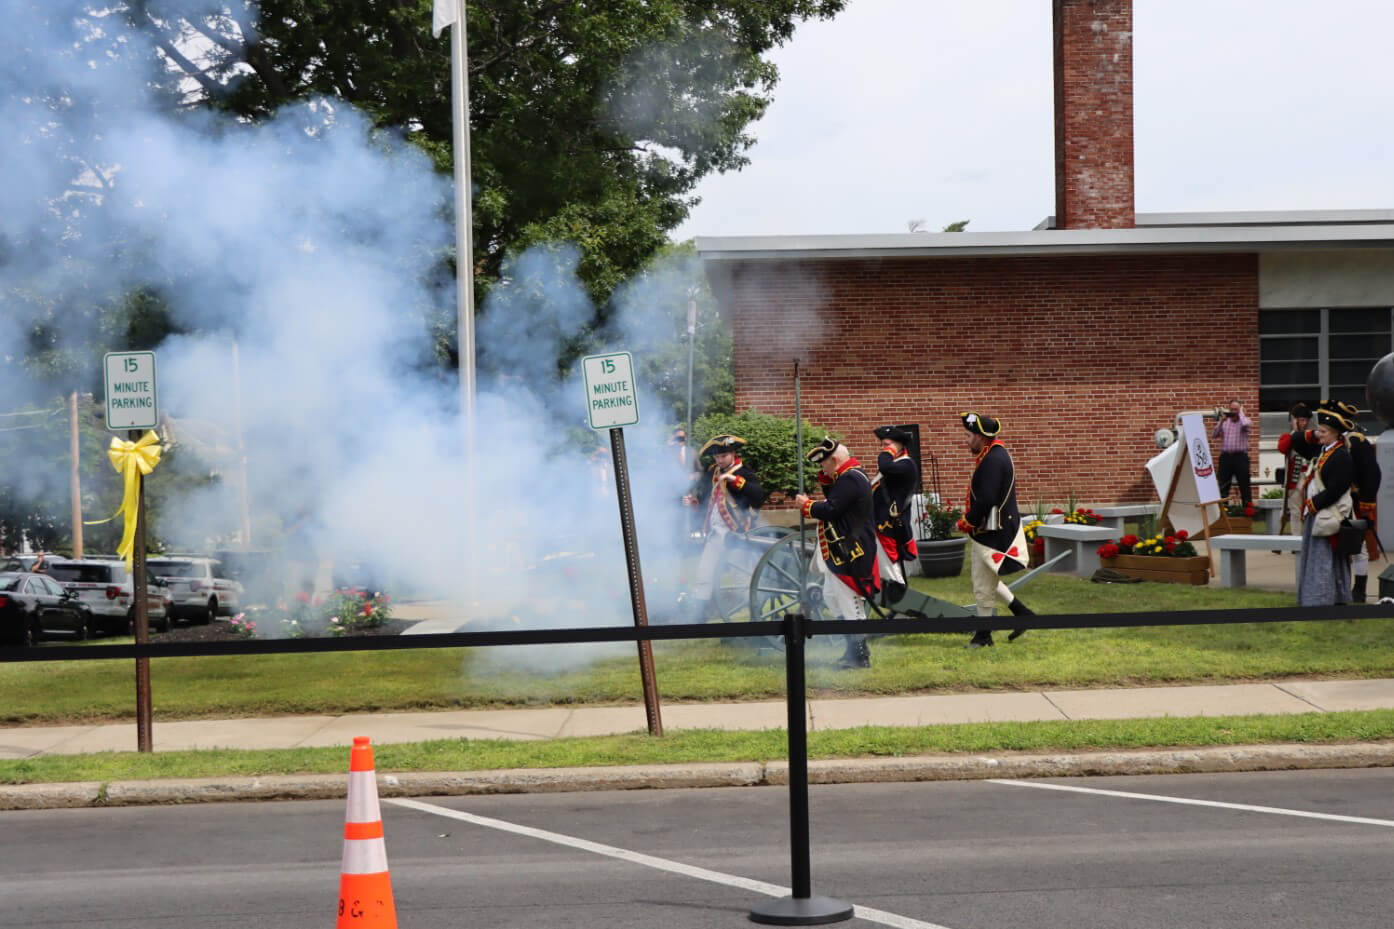 Revolutionary War reenactors firing historical cannons during a press conference